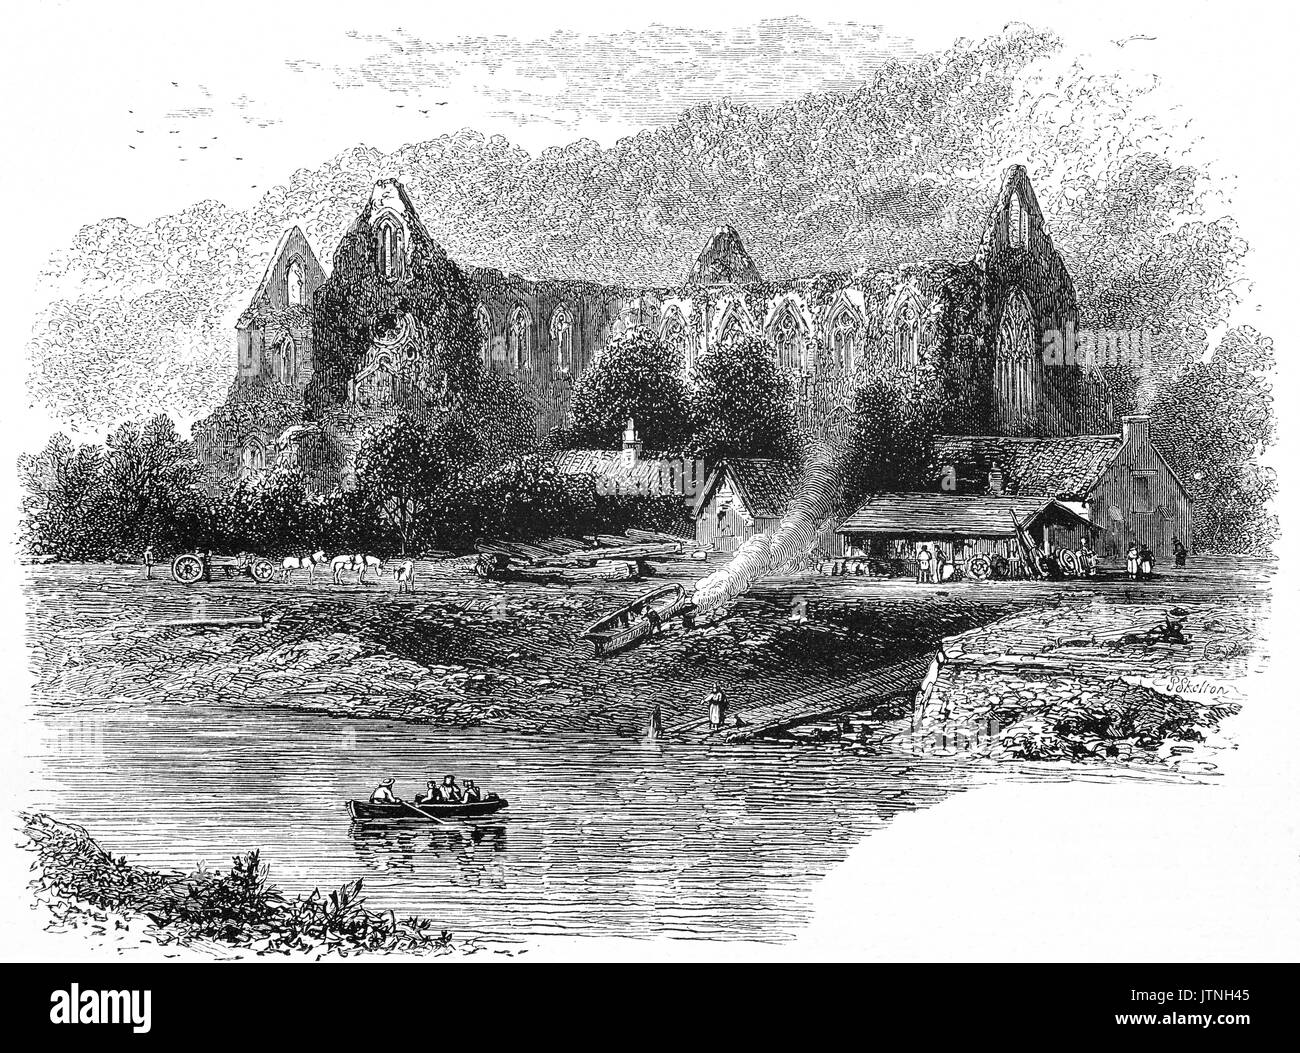 1870:  Tintern Abbey, founded on 9 May 1131, viewed from the River Wye, which forms the border between Monmouthshire in Wales and Gloucestershire in England. It was only the second Cistercian foundation in Britain, and the first in Wales. Falling into ruin after the Dissolution of the Monasteries in the 16th century, the remains were celebrated in poetry and often painted by visitors from the 18th century onwards. Monmouthshire, Wales, United Kingdom. Stock Photo